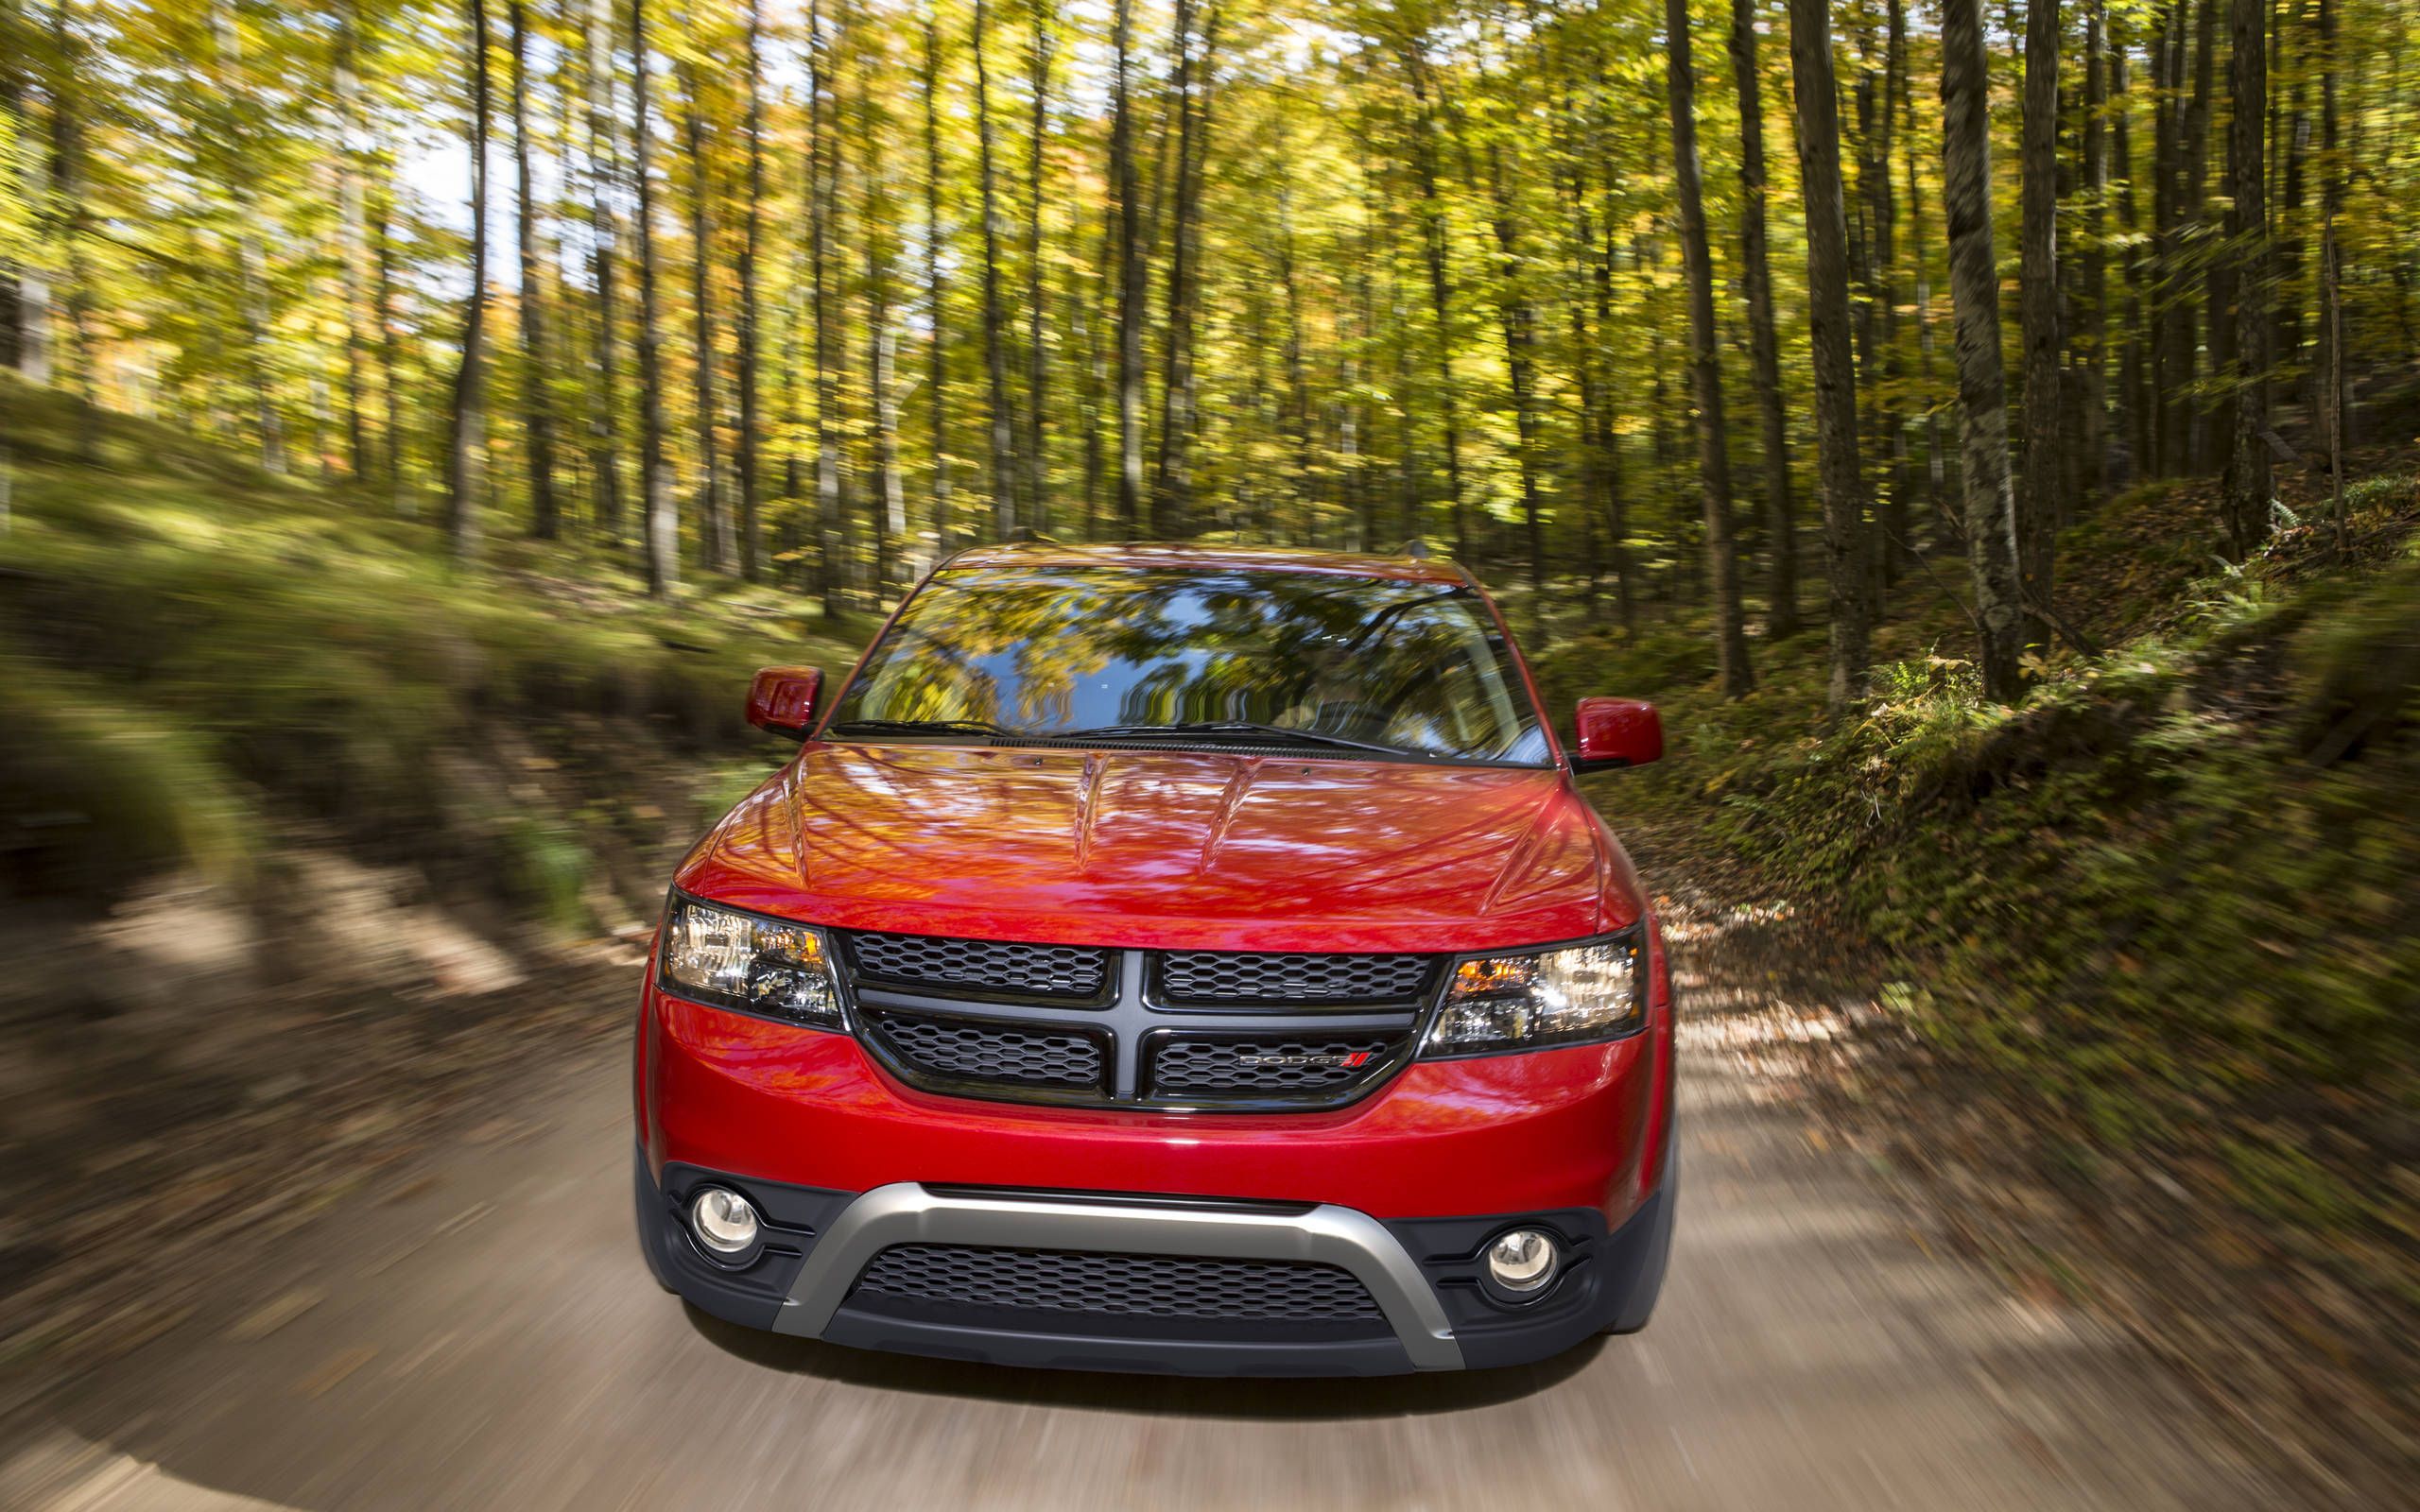 2014 Dodge Journey Crossroad review notes